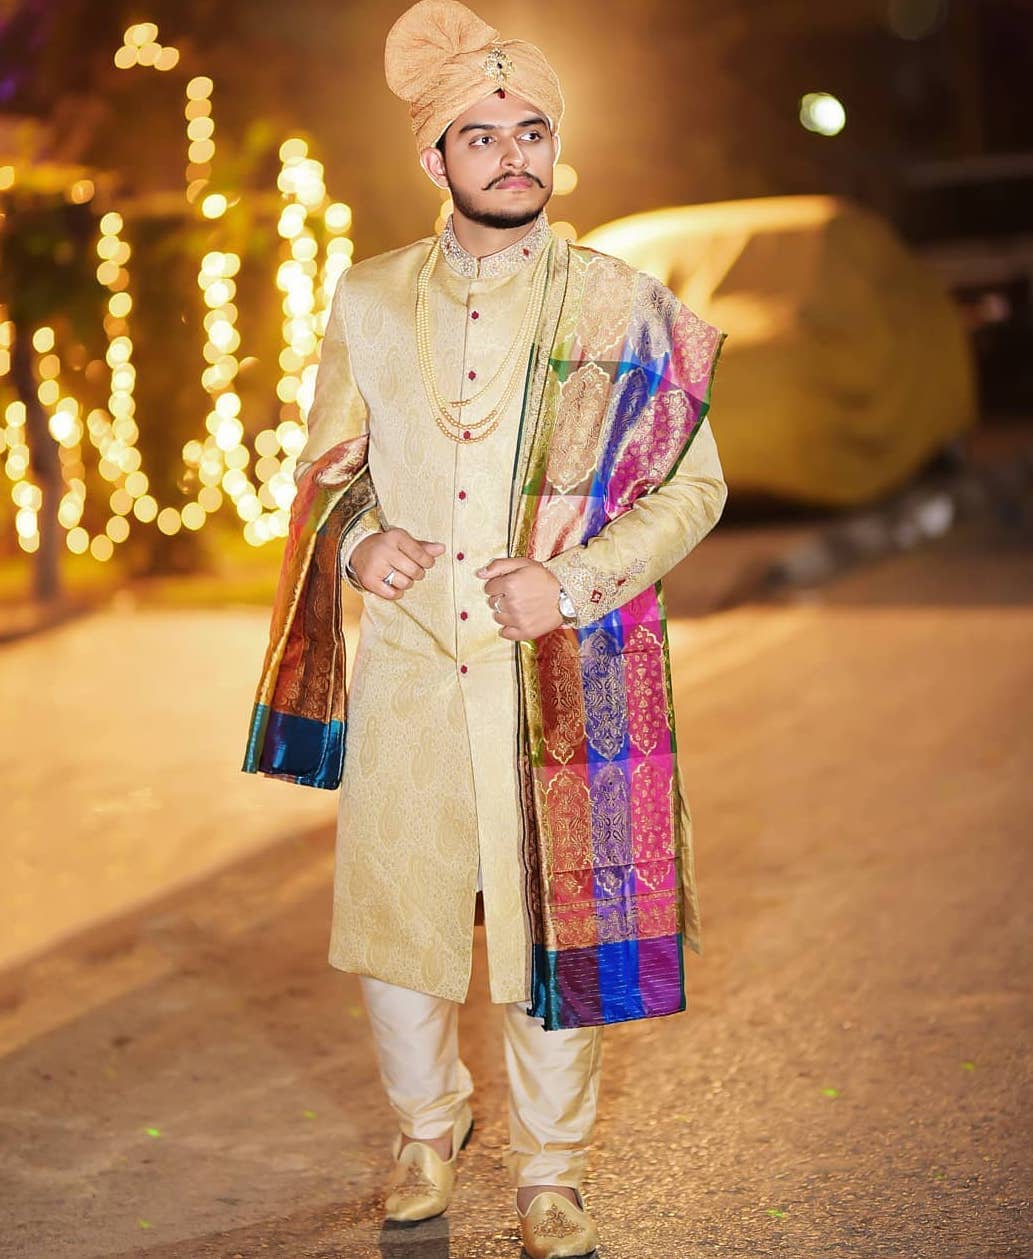 With a Colorful Stole - Golden Sherwani